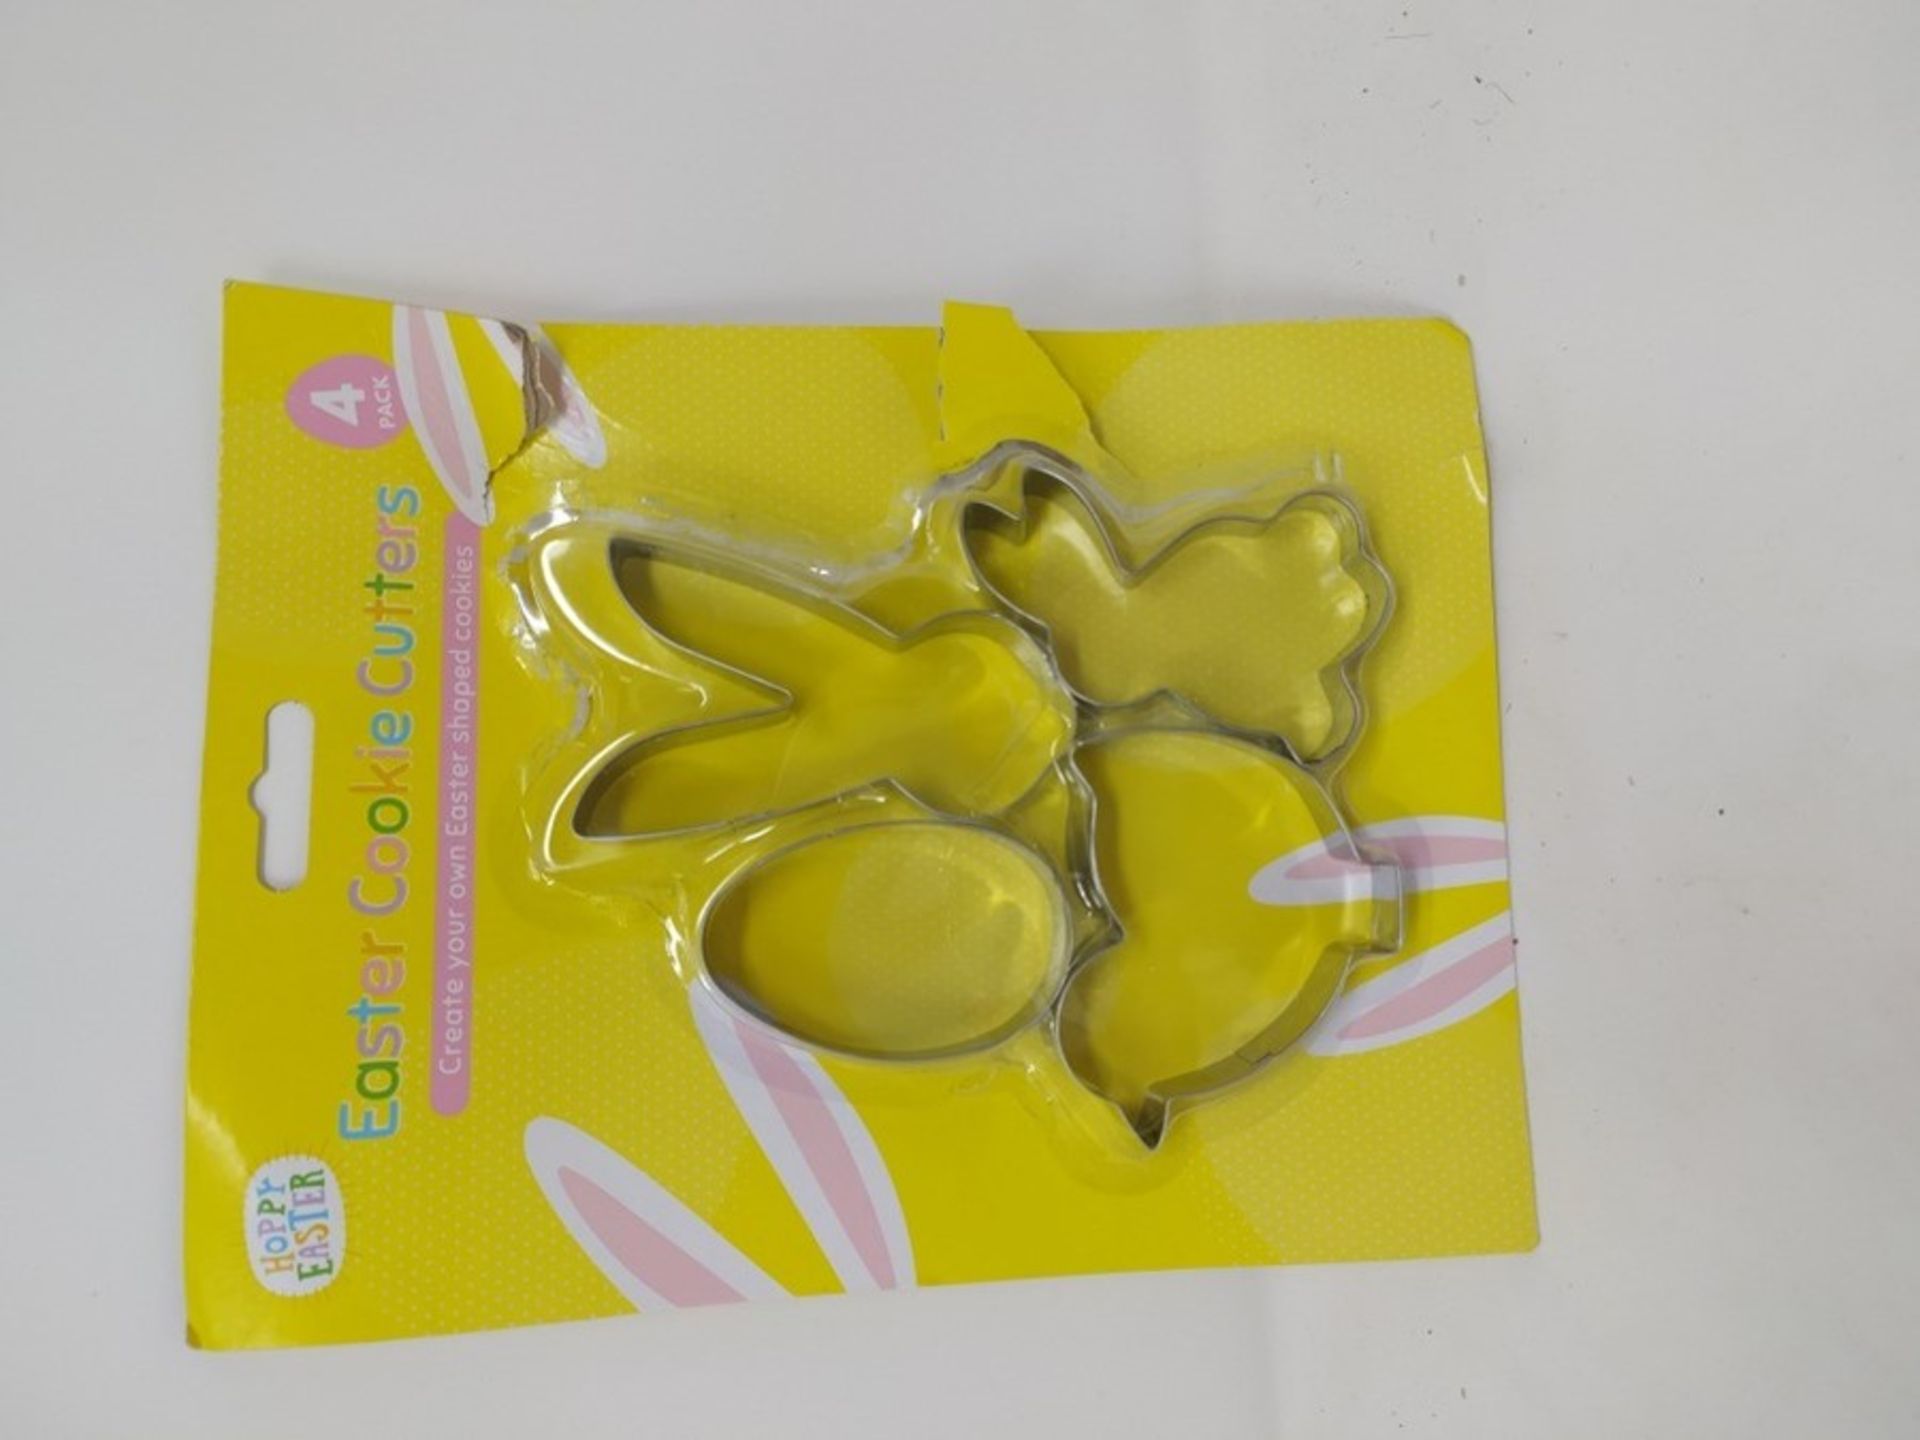 ITP G24042 Easter Steel Cookie Cutters Mould Cake Biscuit Baking Tool Decoration Set 4 - Image 4 of 4